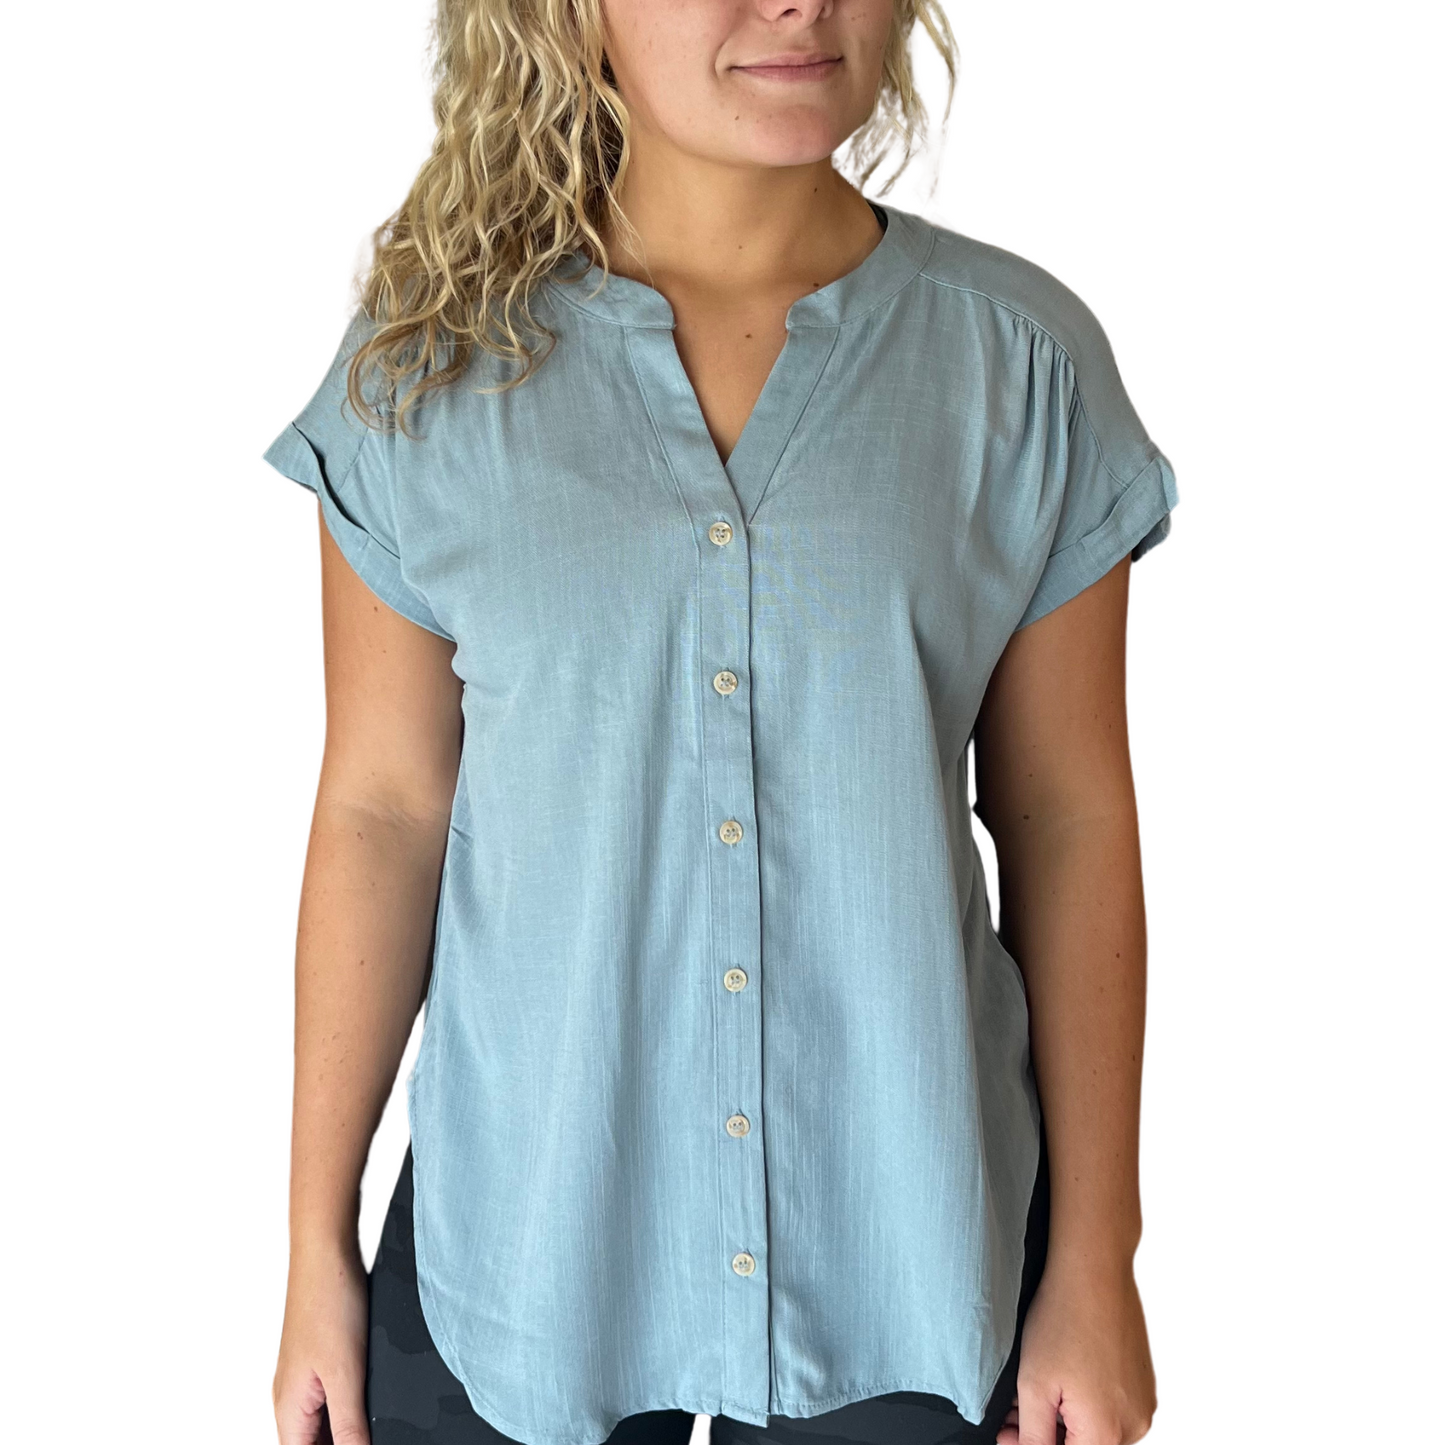 Rolled Sleeve woven top in dusty blue